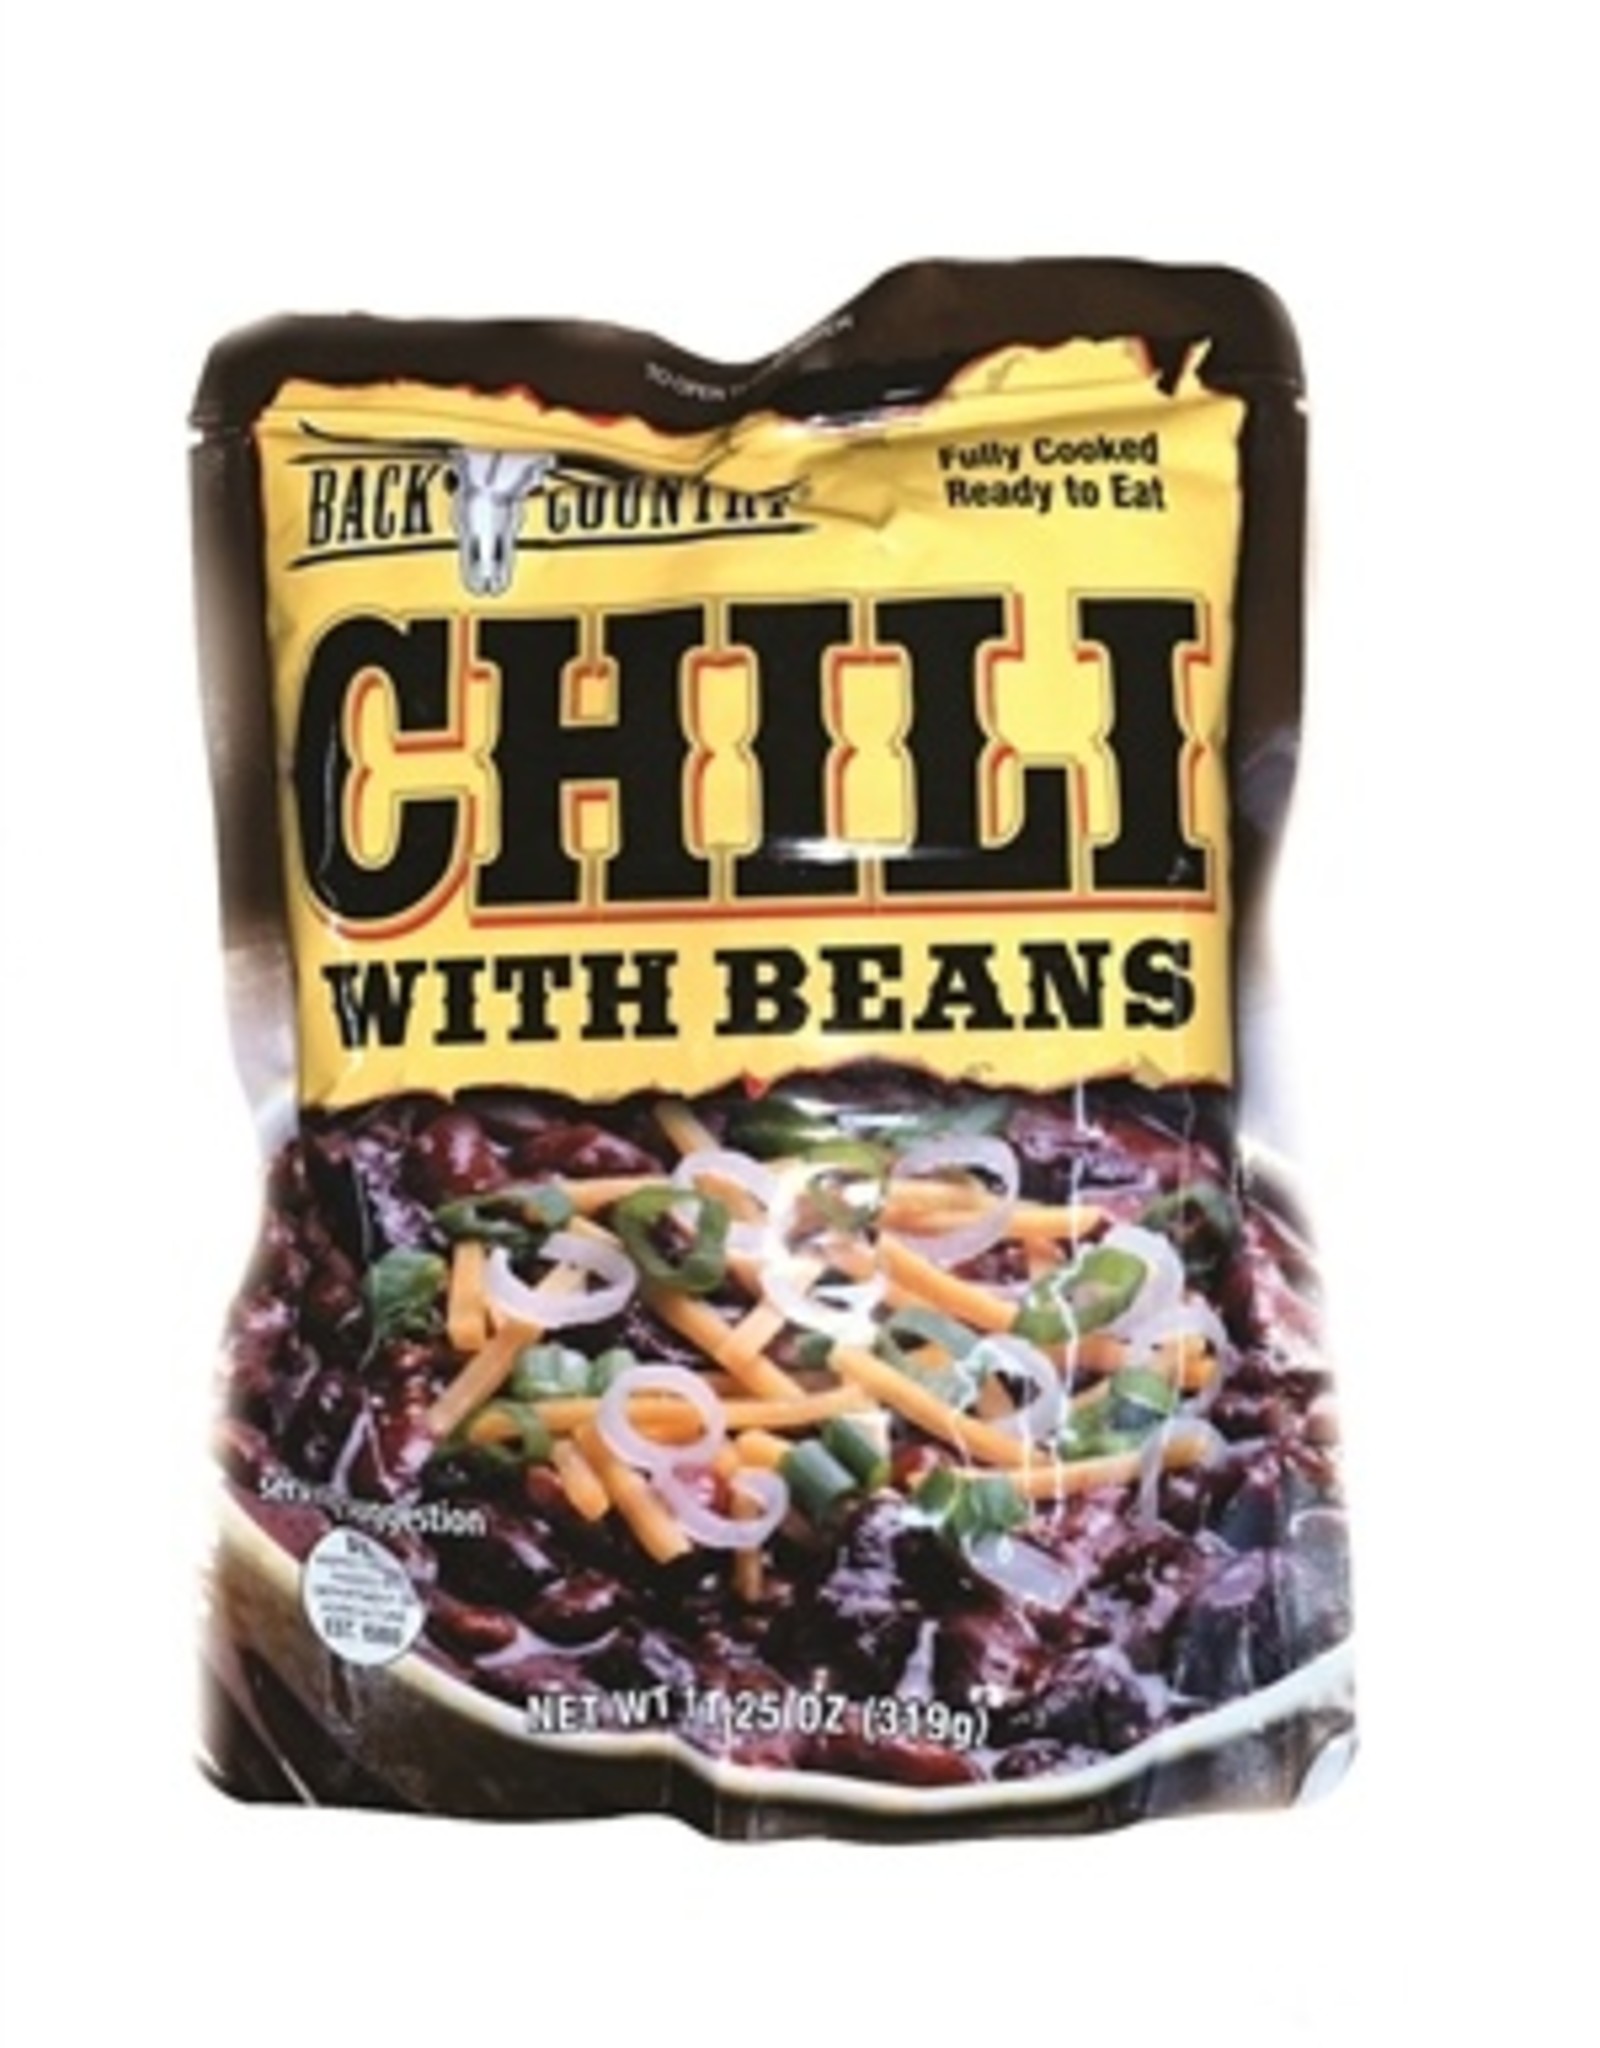 SWISS LINK BACK COUNTRY CHILI WITH BEANS